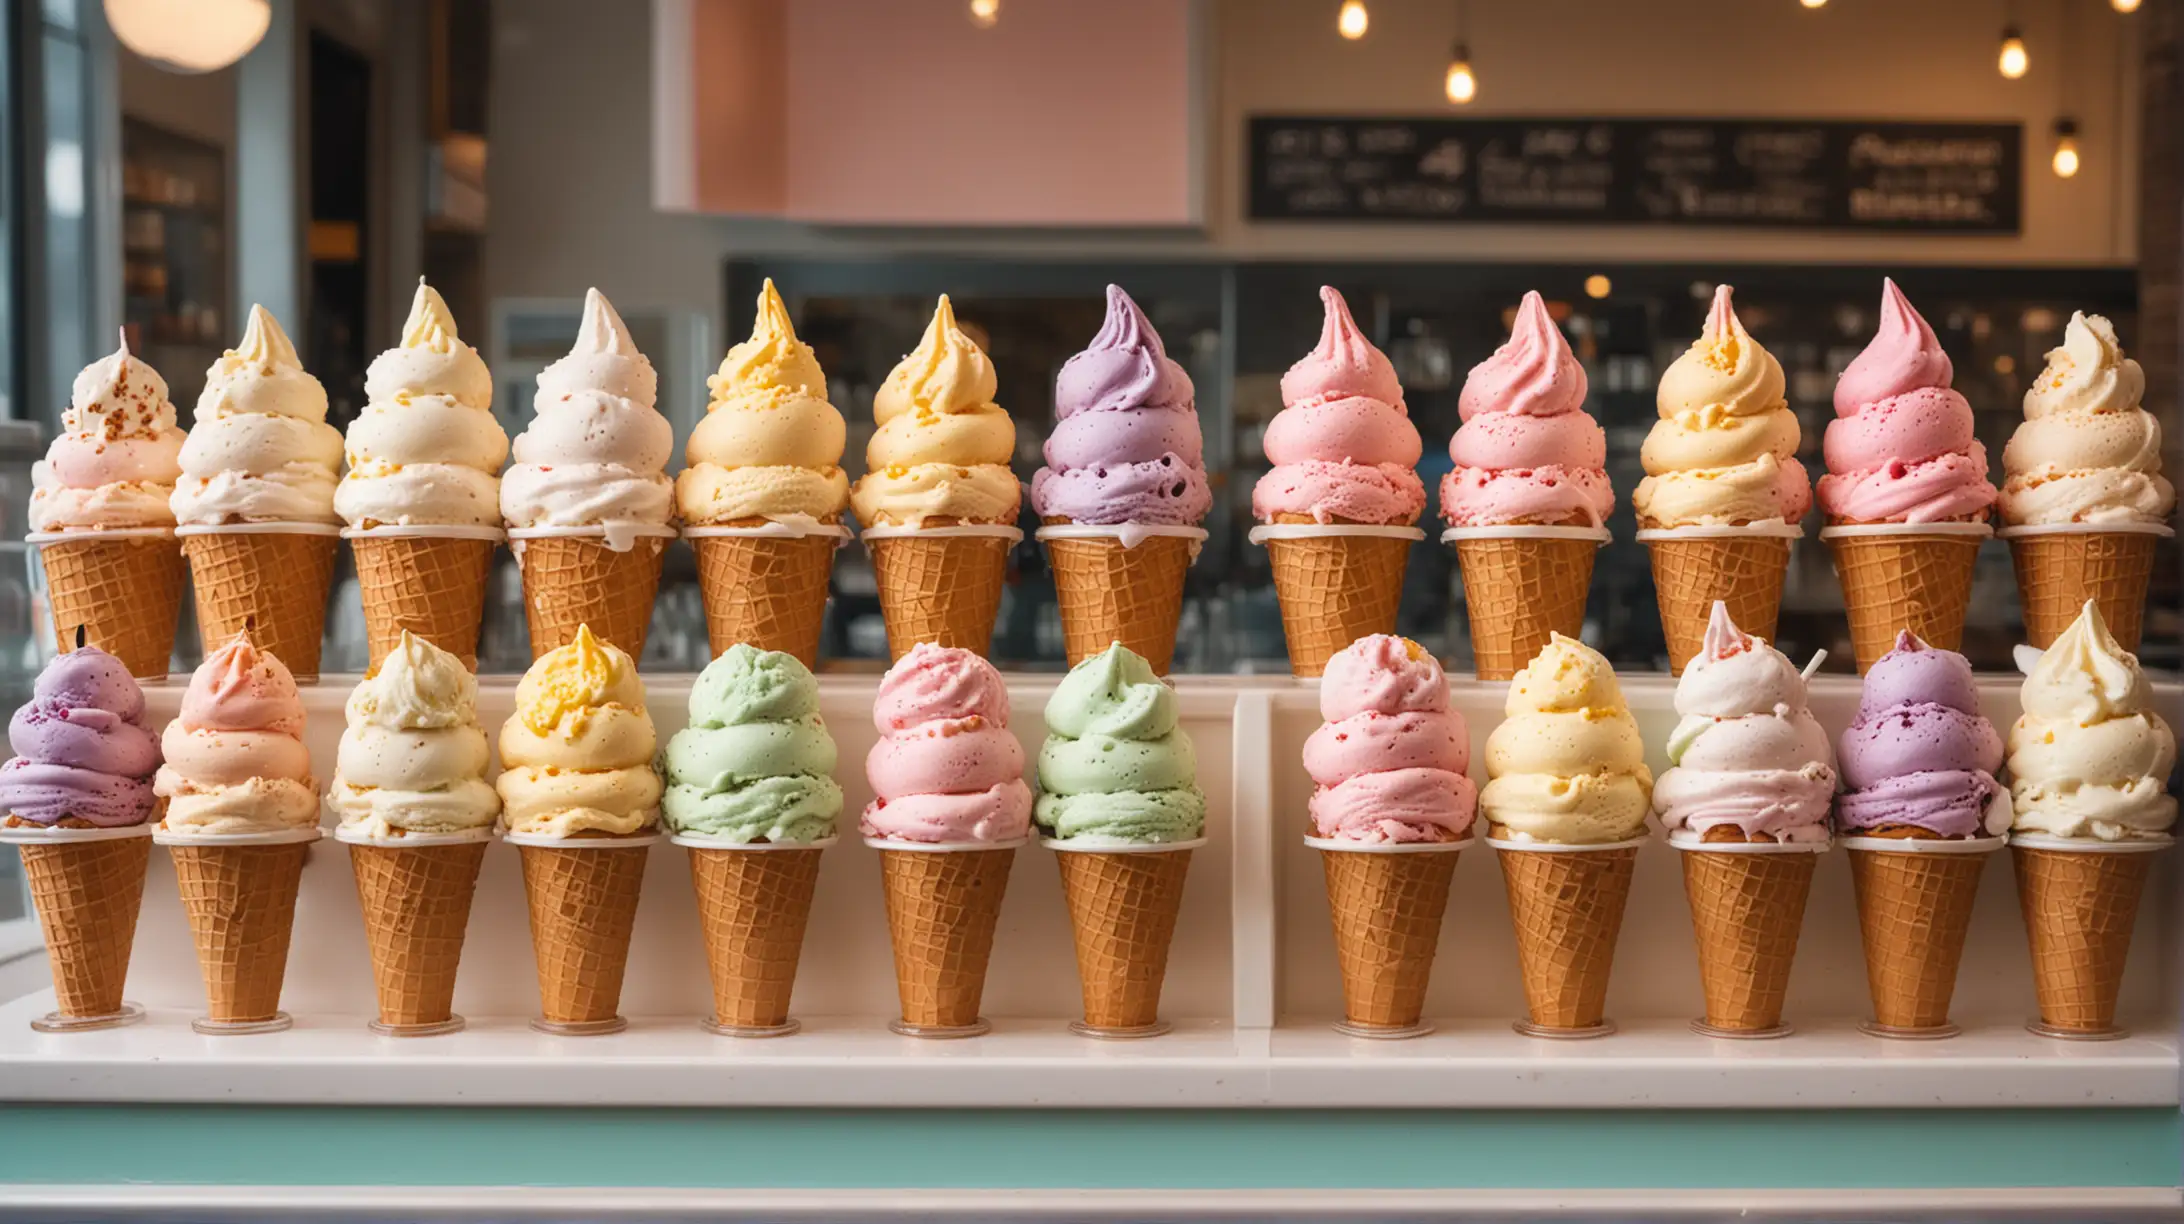 Showcase of an ice cream parlor with lots of different ice cream flavors in different colors.